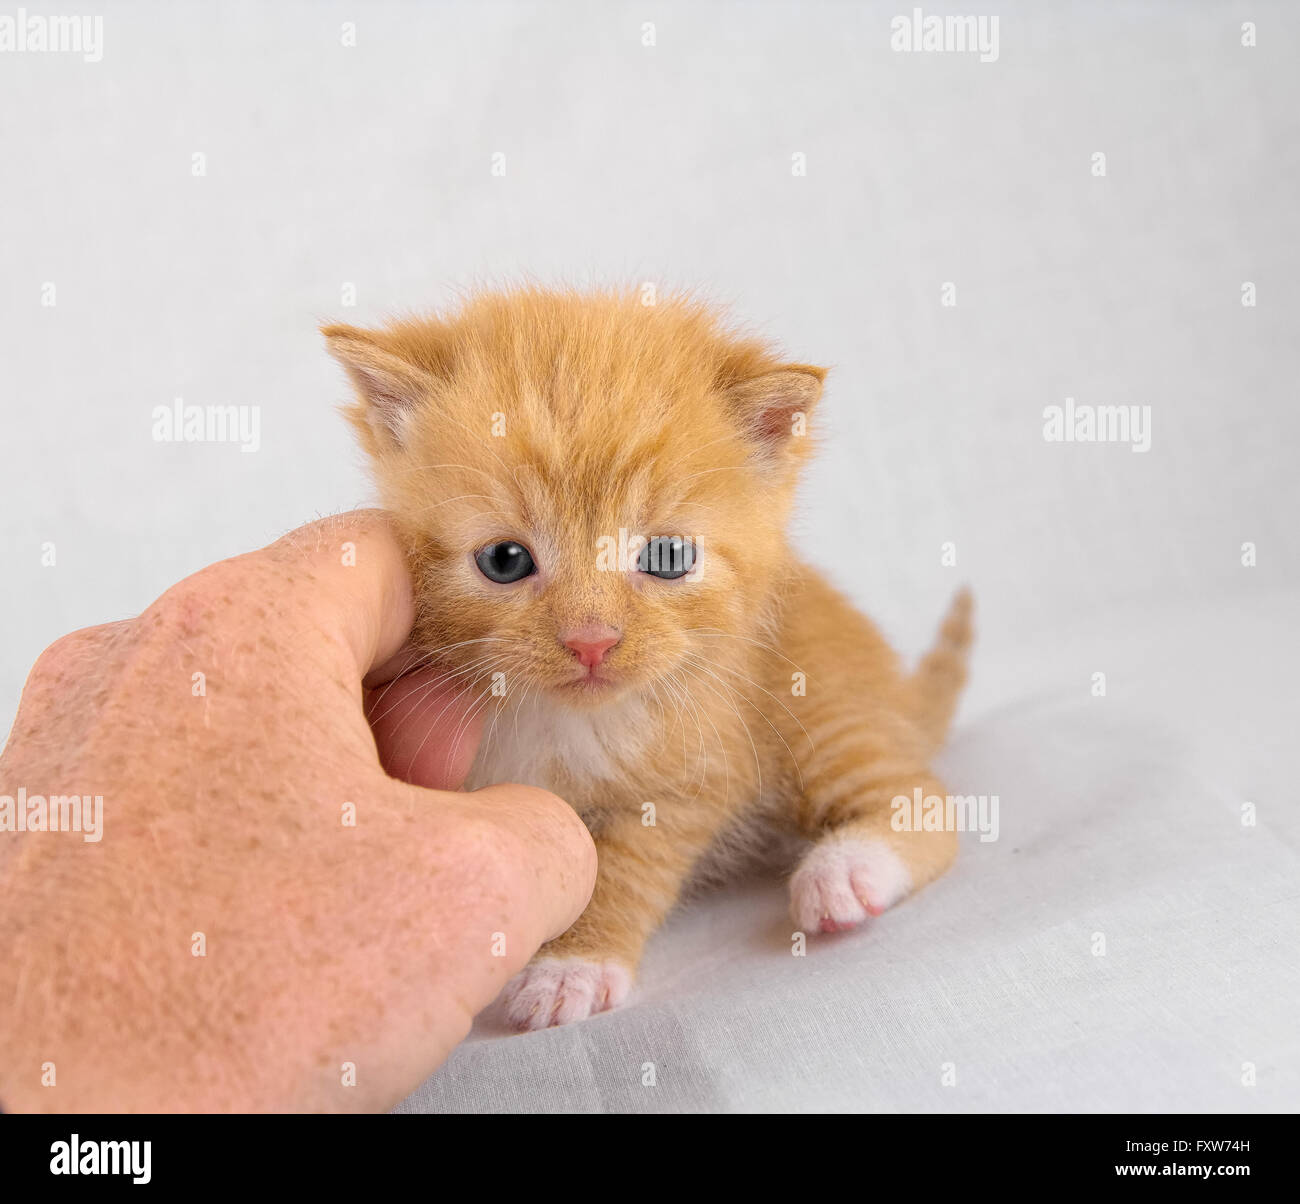 Small kitten being cuddled by a human hand Stock Photo